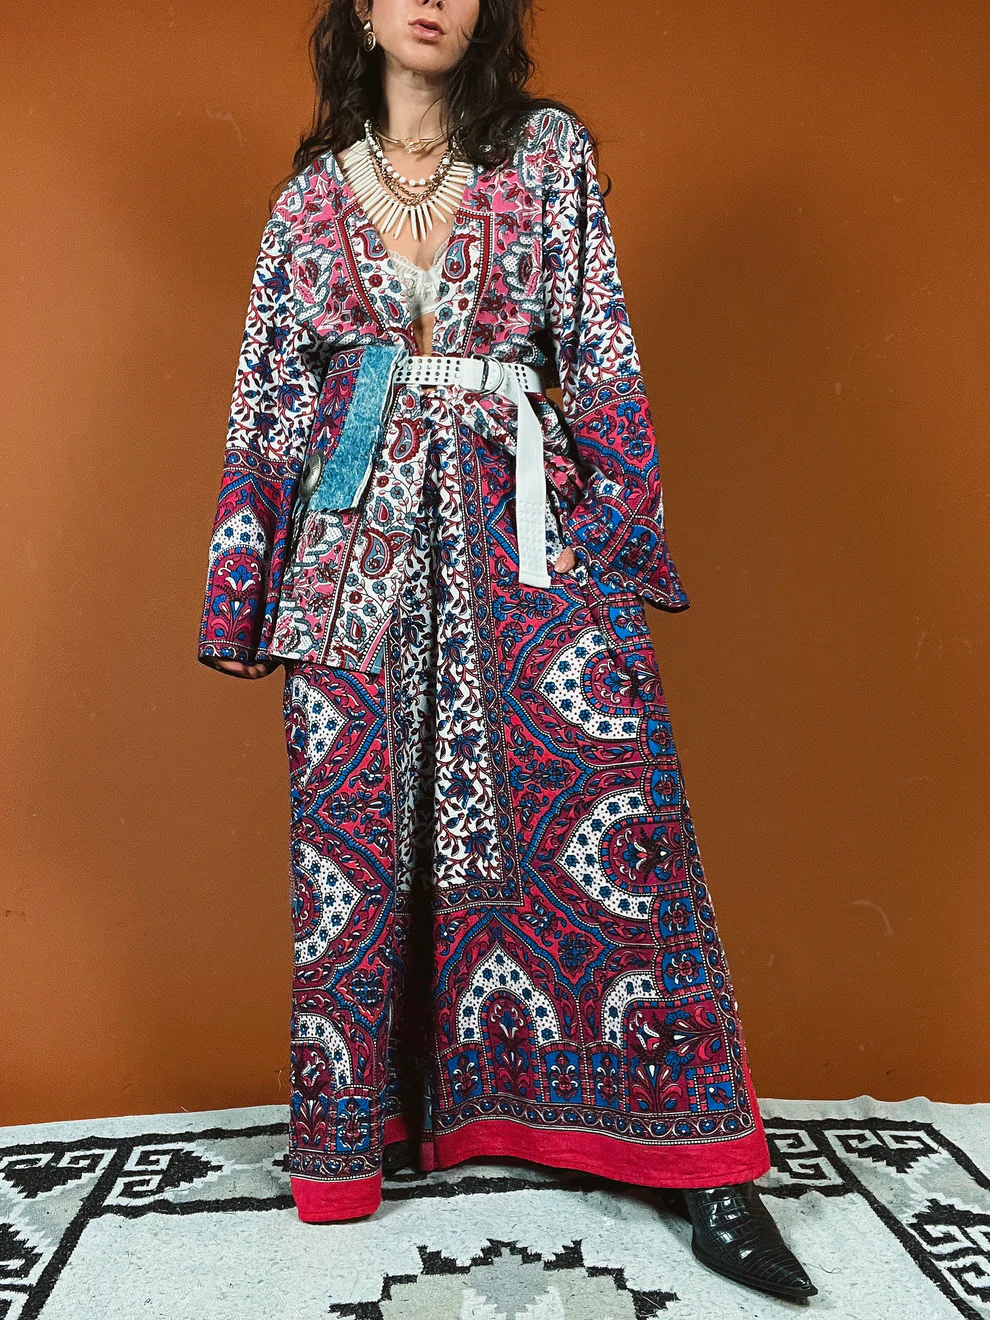 a woman in a long dress standing on a rug.